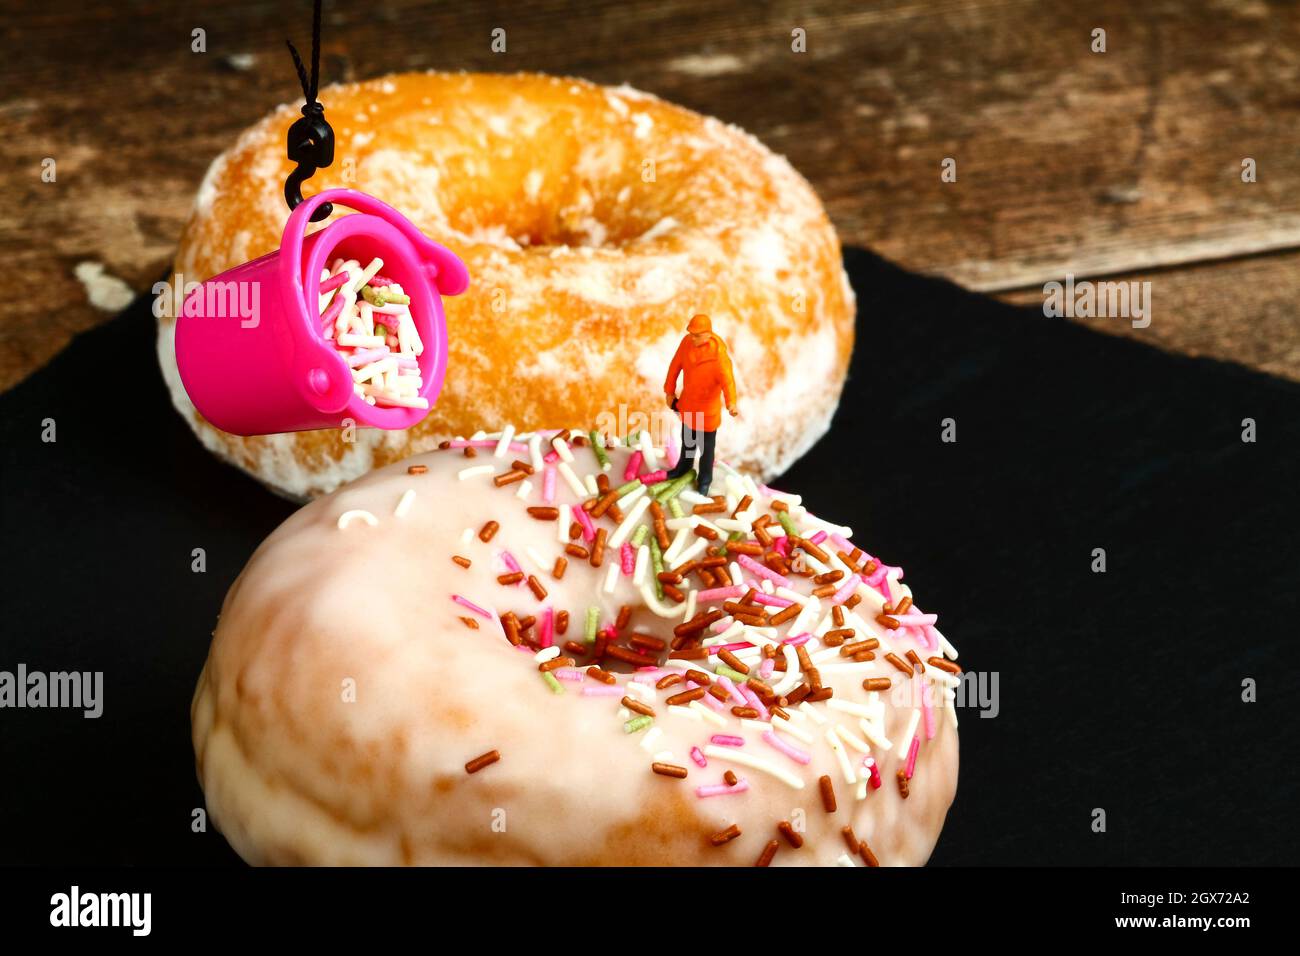 Conceptual image of a miniature figure workman guiding a bucket filled with sprinkles to pour over the icing sugar topping of a fresh doughnut Stock Photo